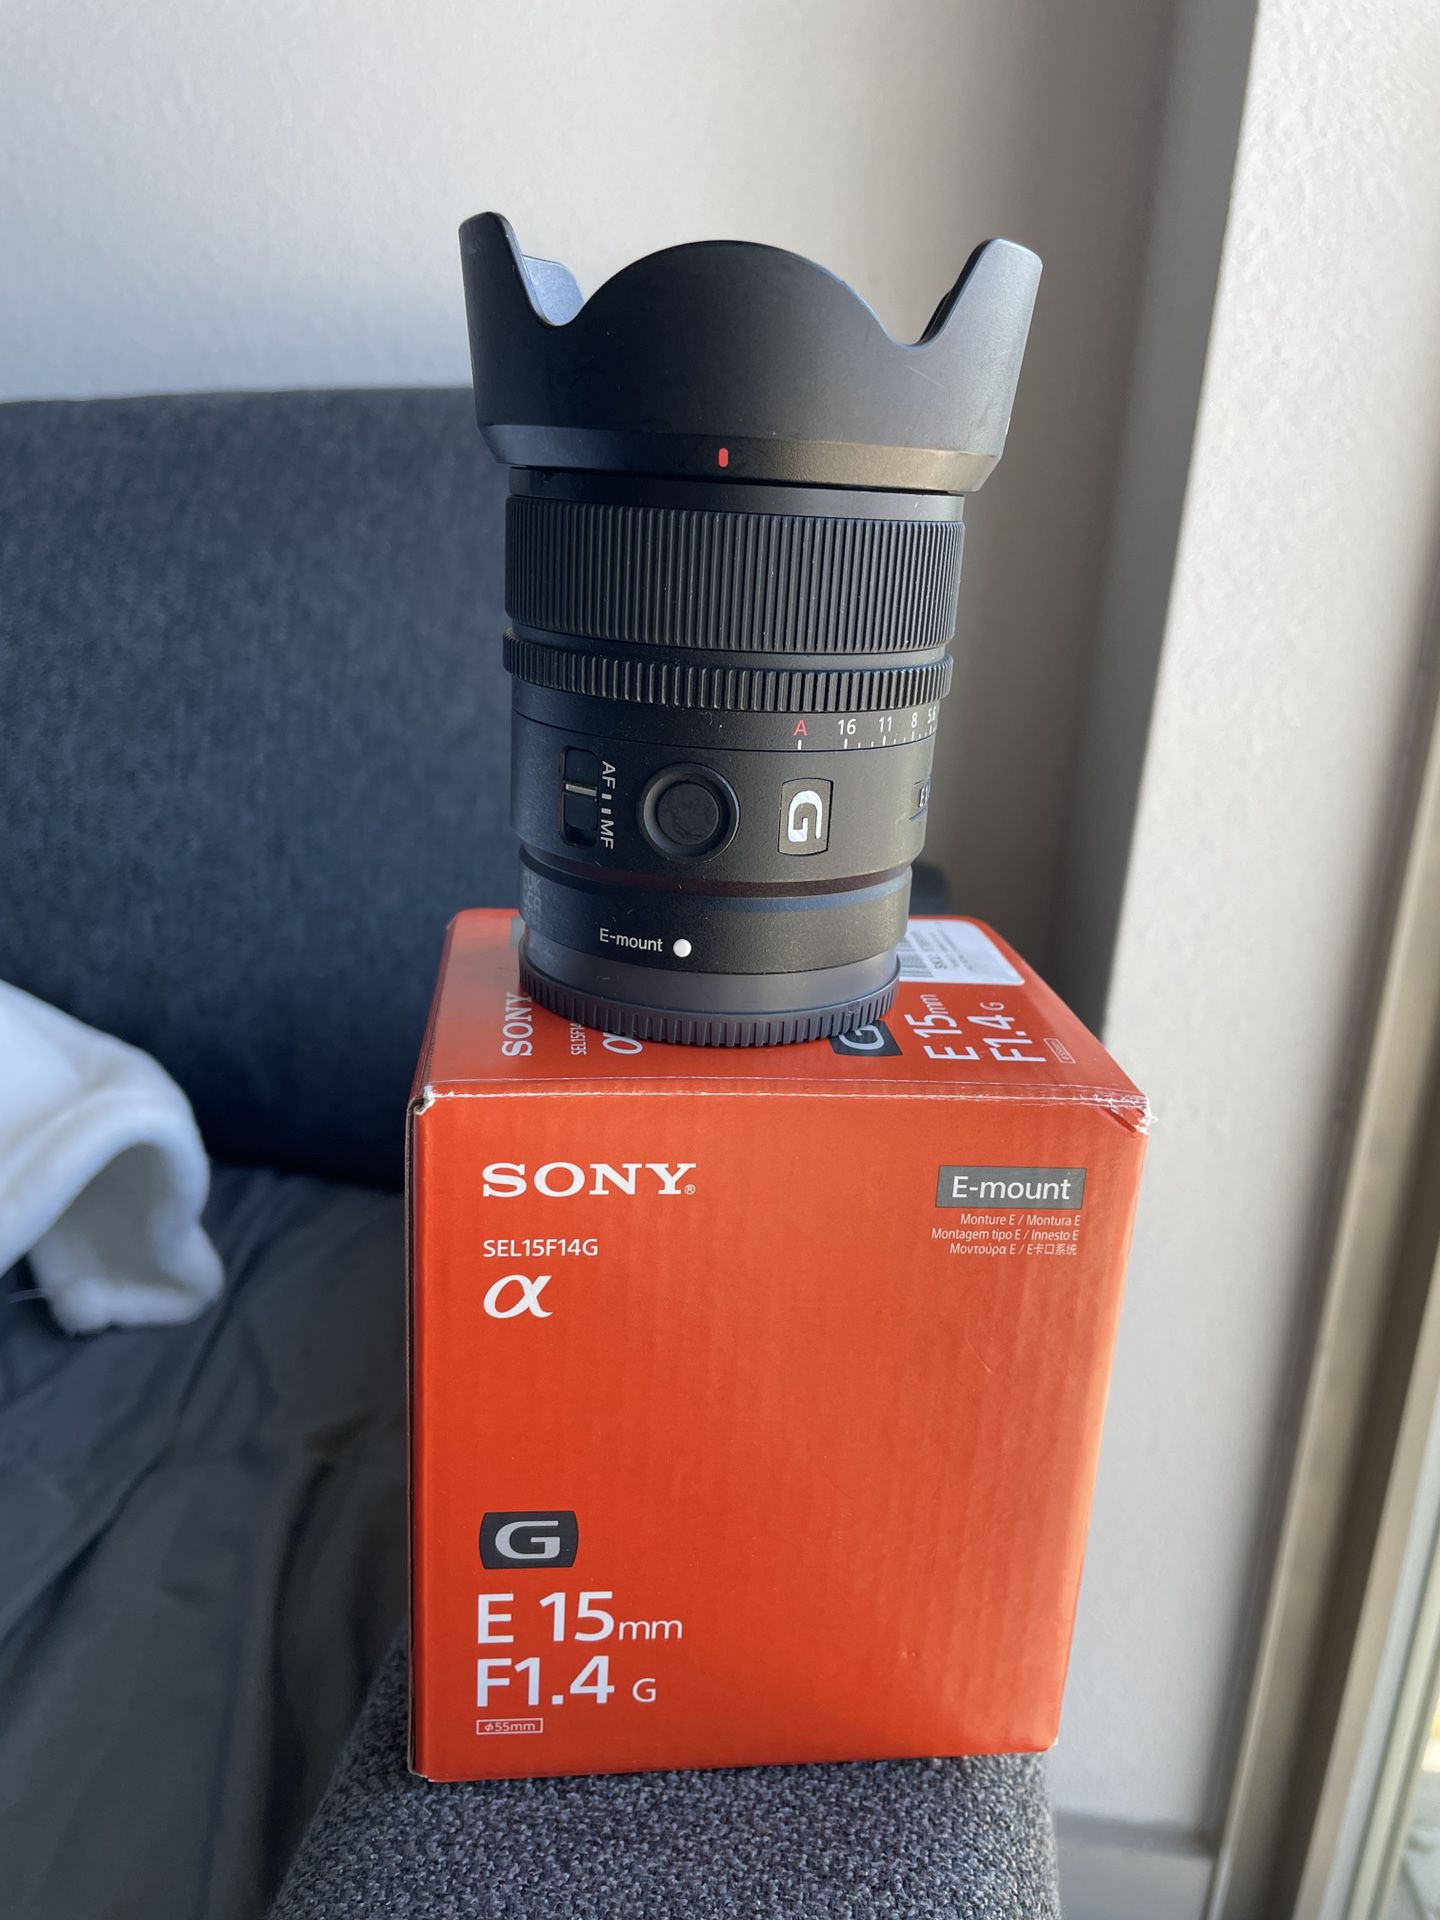 Sony - E 15mm F1.4 G APS-C Large-aperture wide-angle G lens - Black (Sel15F14G)